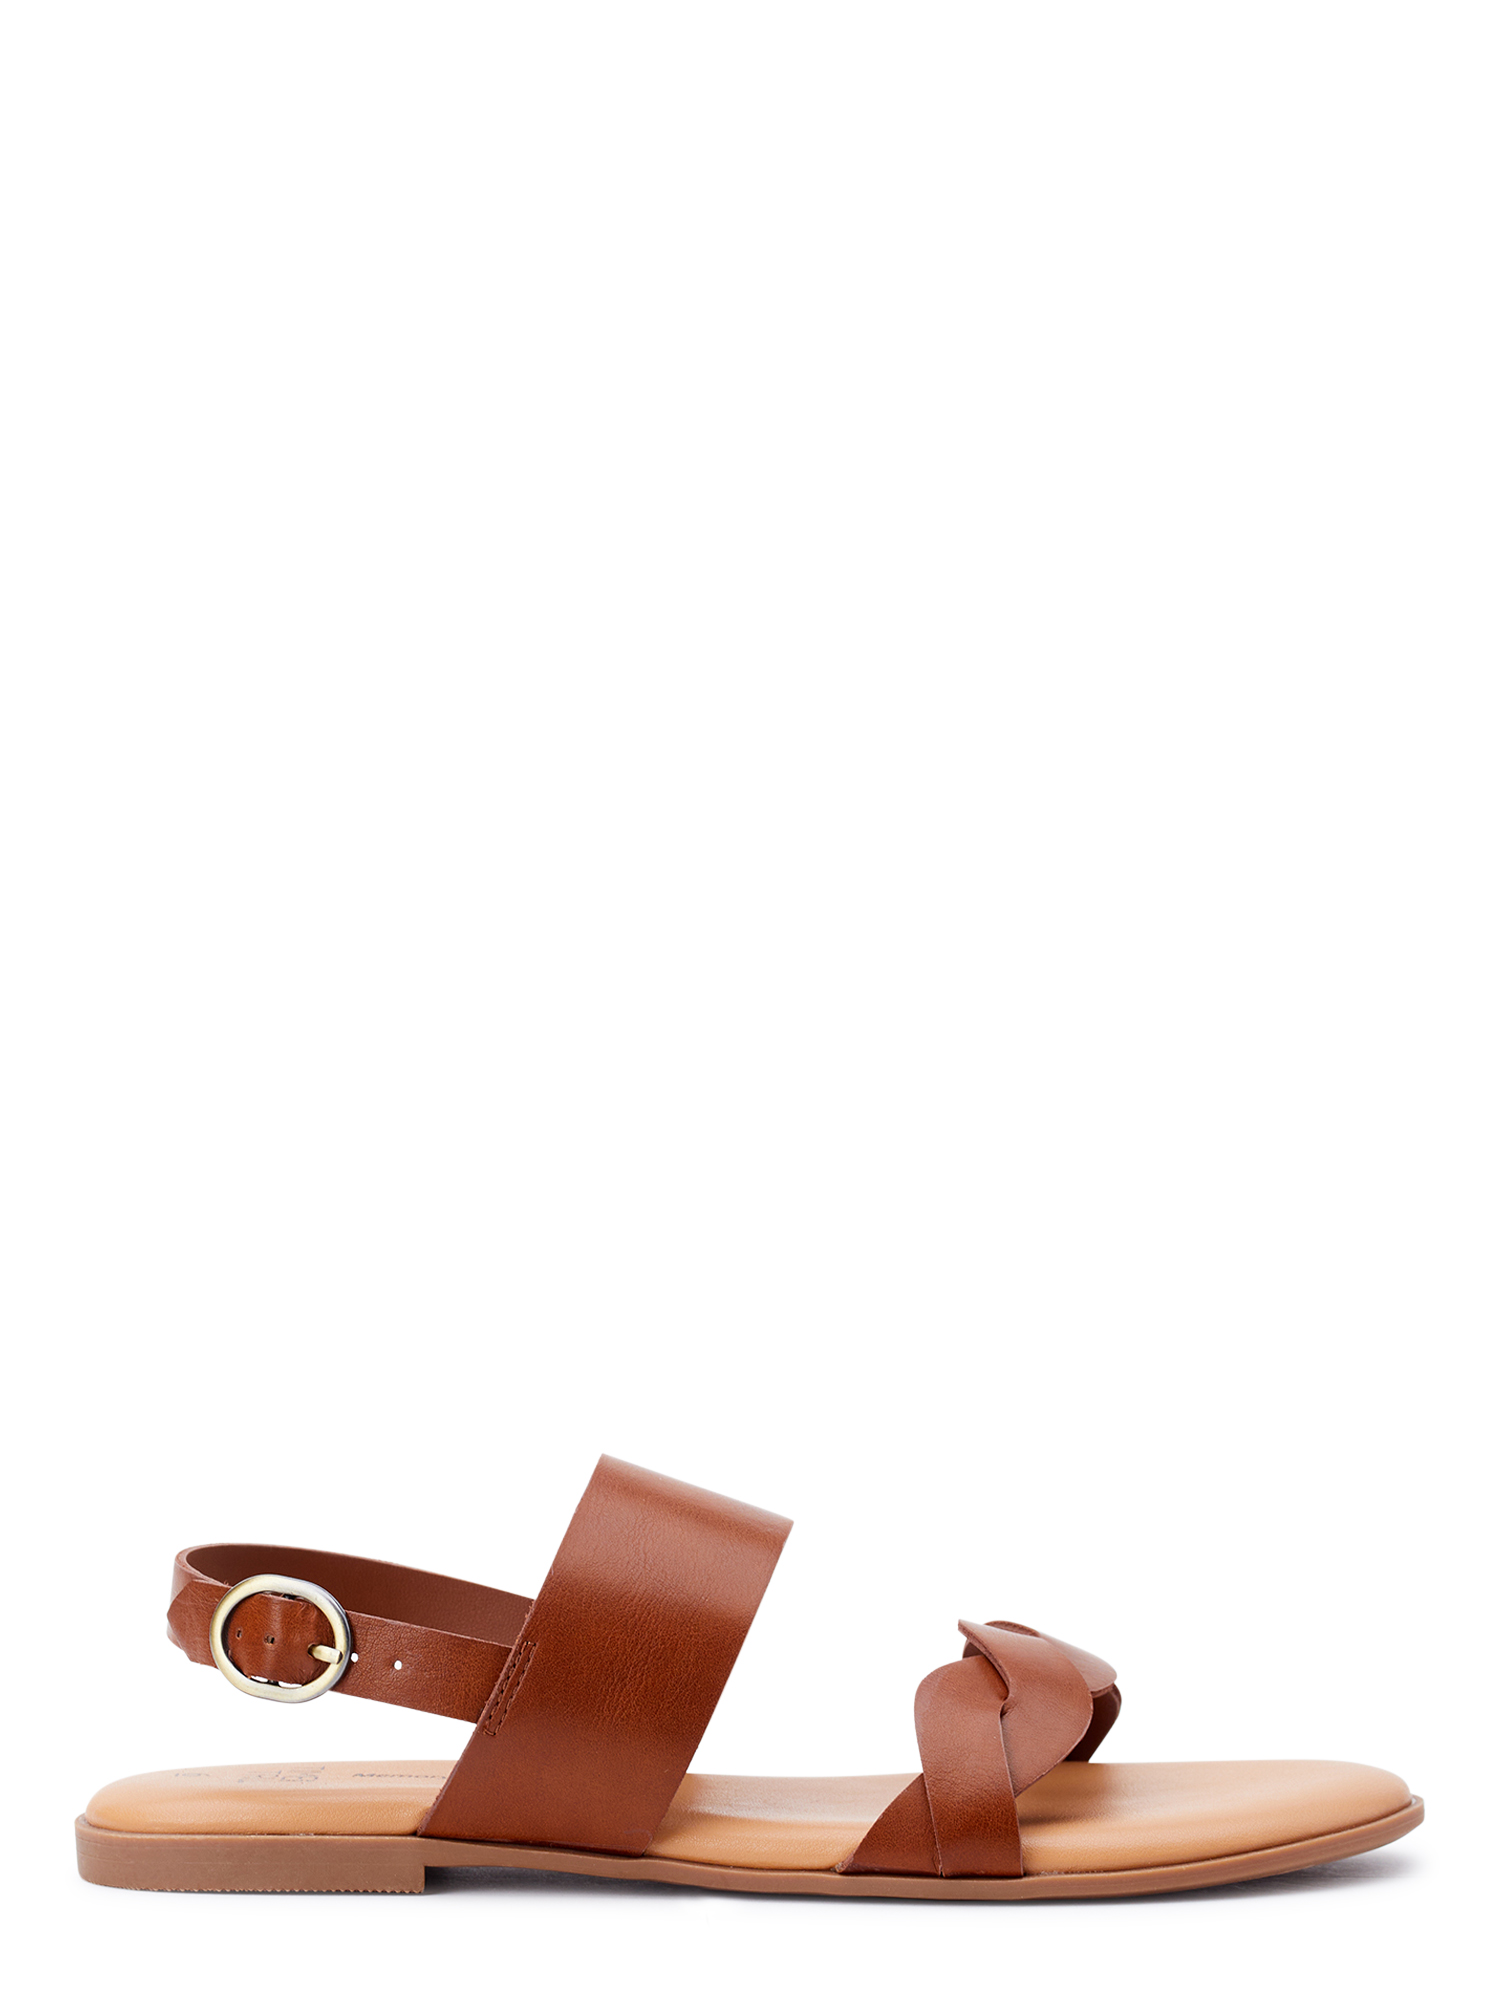 Time and Tru Women's Twist Strap Sandals - image 2 of 5